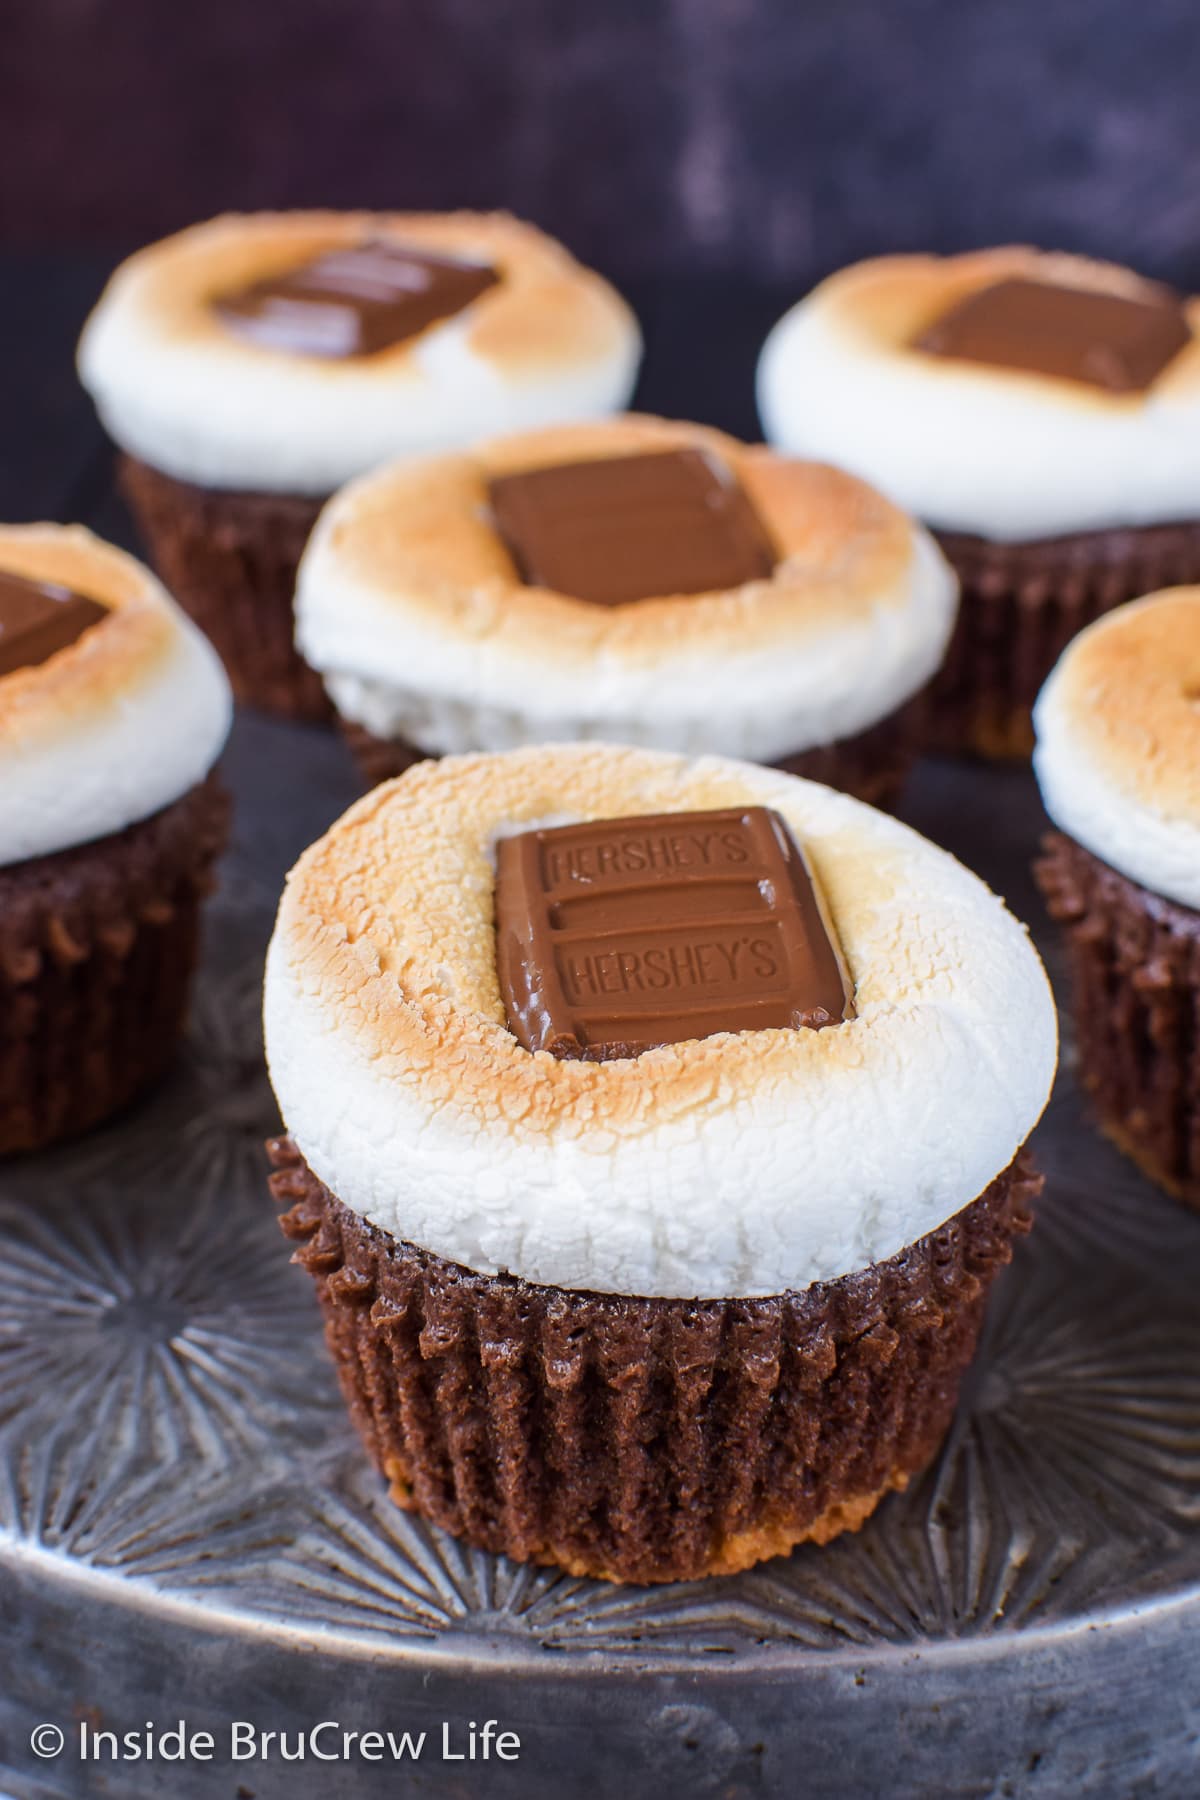 Chocolate cupcakes topped with marshmallow and chocolate.